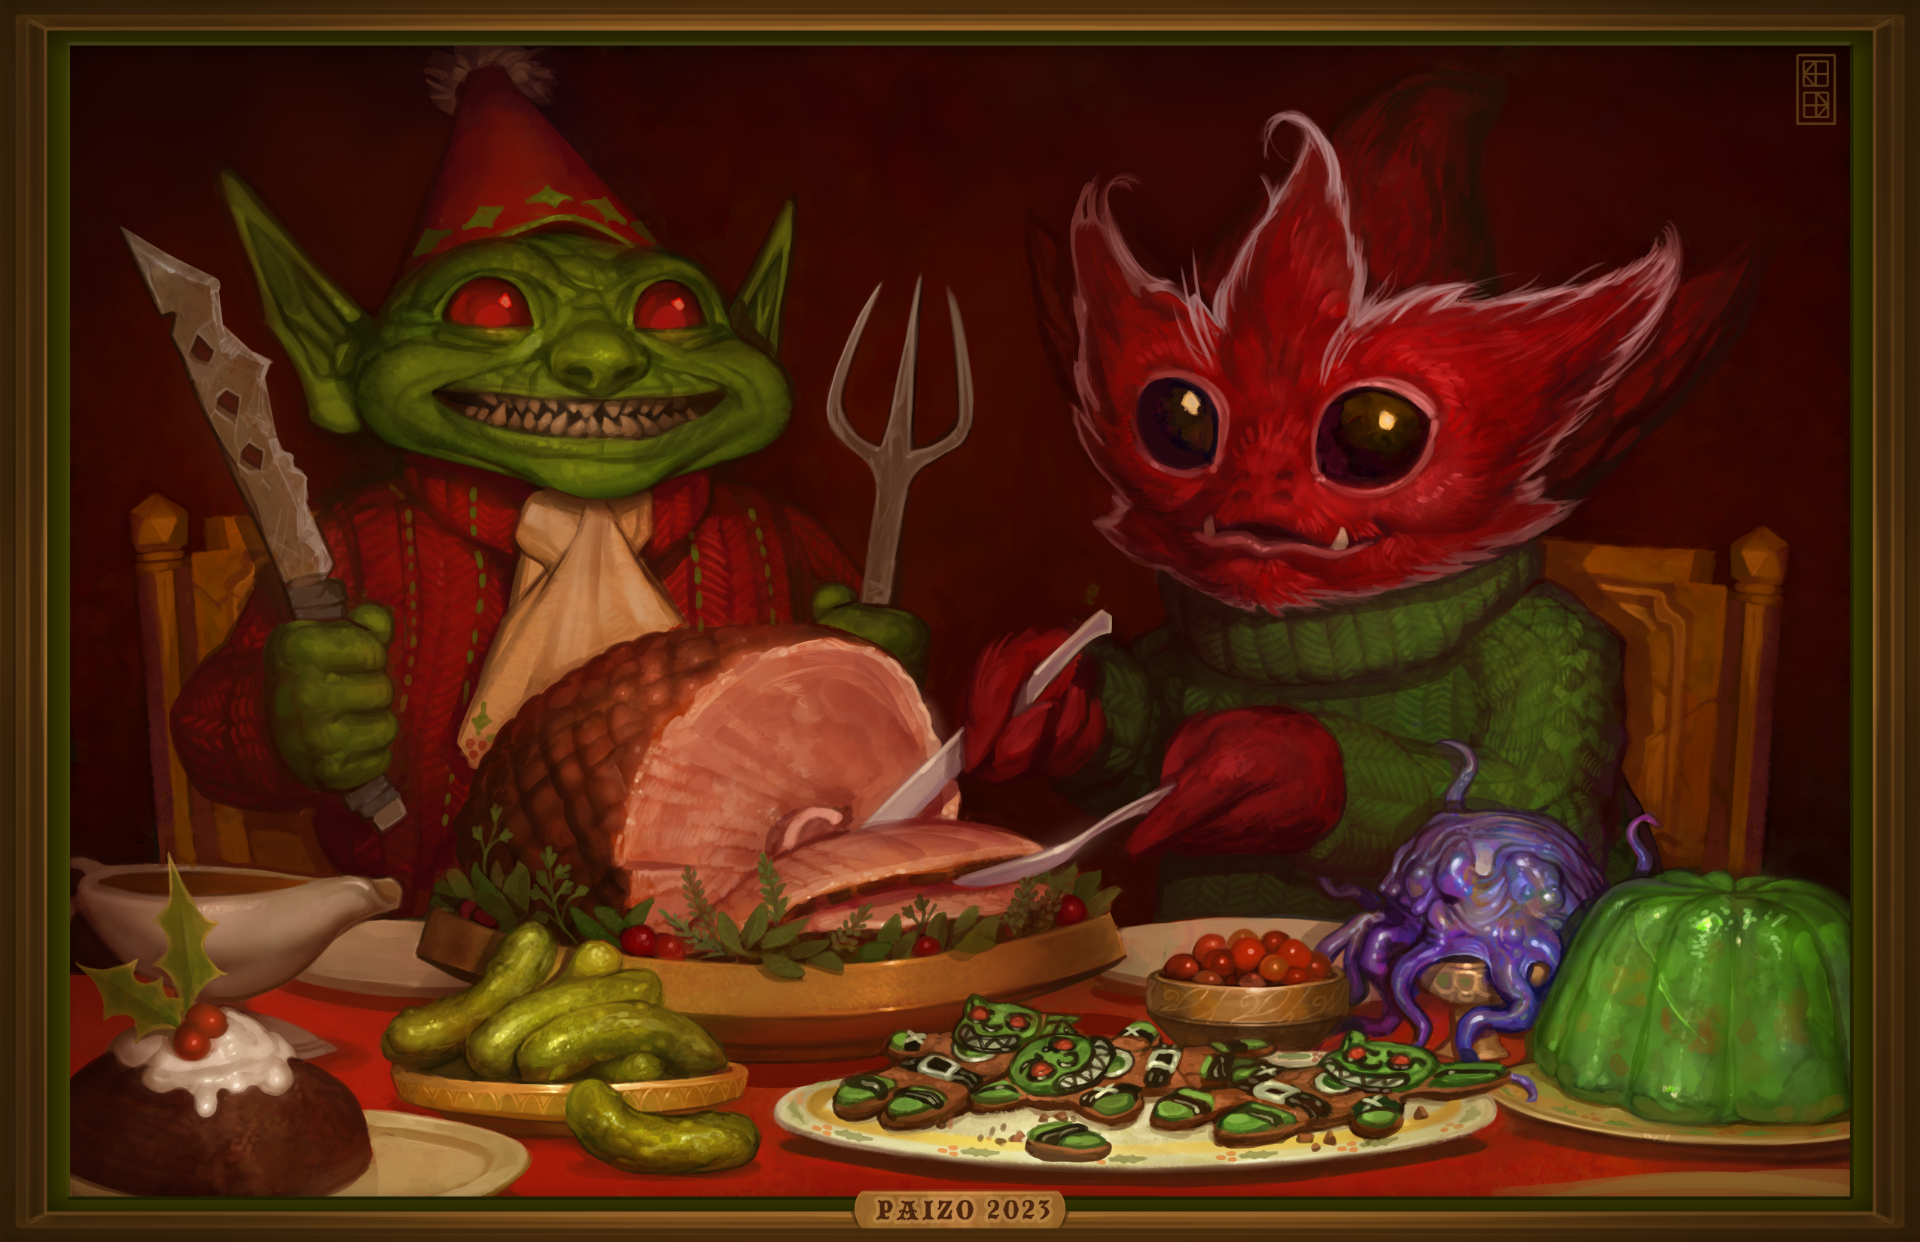 : A skittermander and goblin sitting at a table with a festive feast. The skittermander is carving the roast while the goblin excitedly brandishes tools